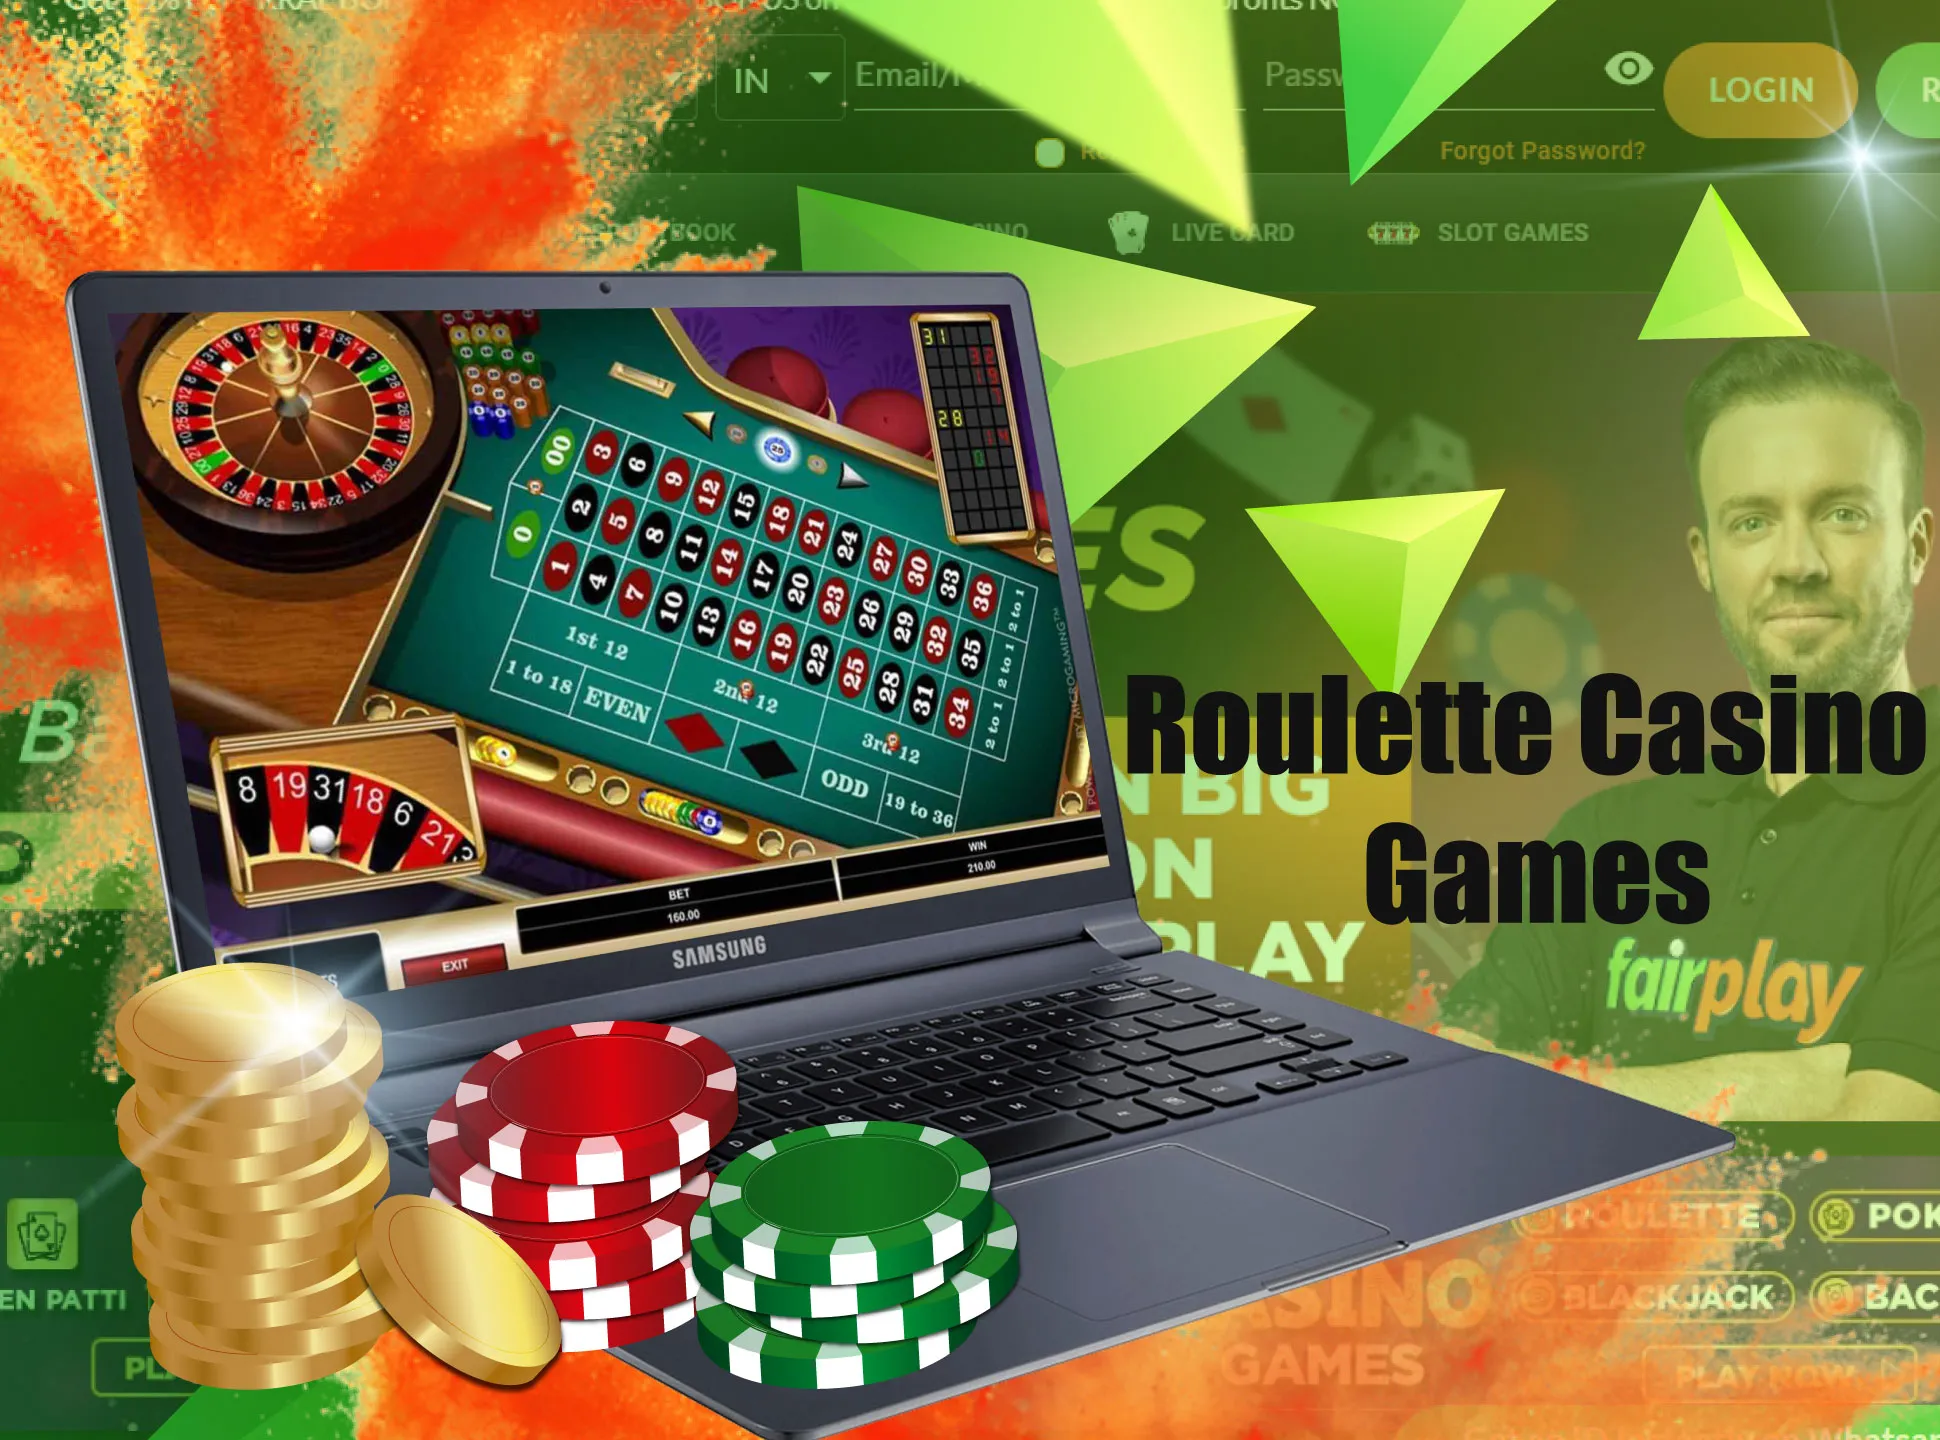 There are different types of roulette - french, european and american.